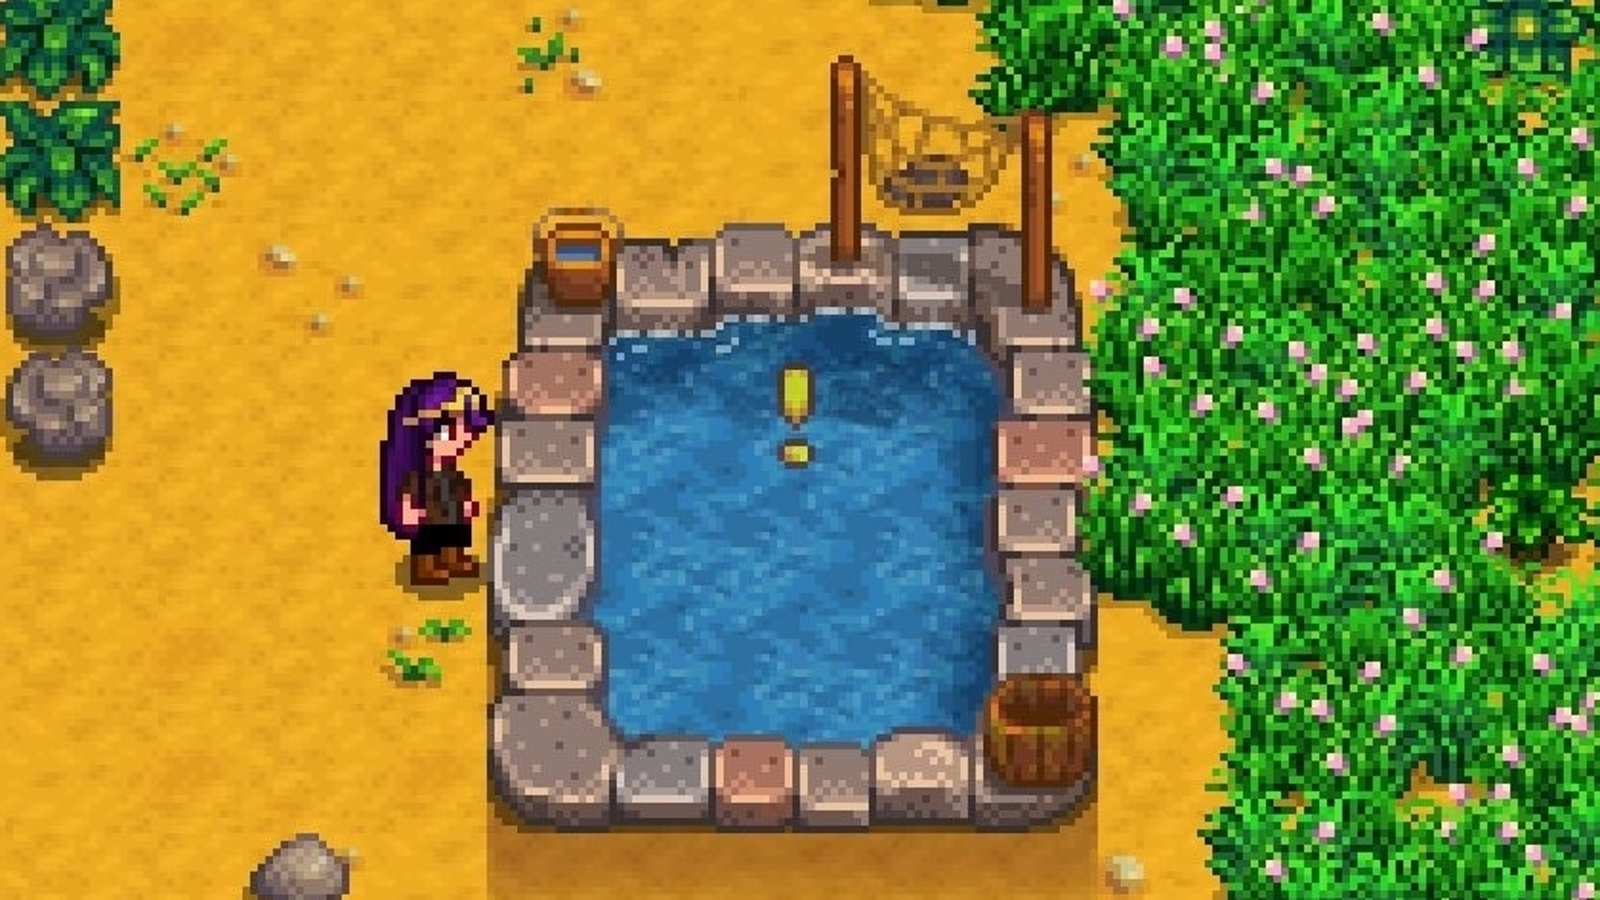 How to Get a Pearl in Stardew Valley (5 Methods and Benefits)